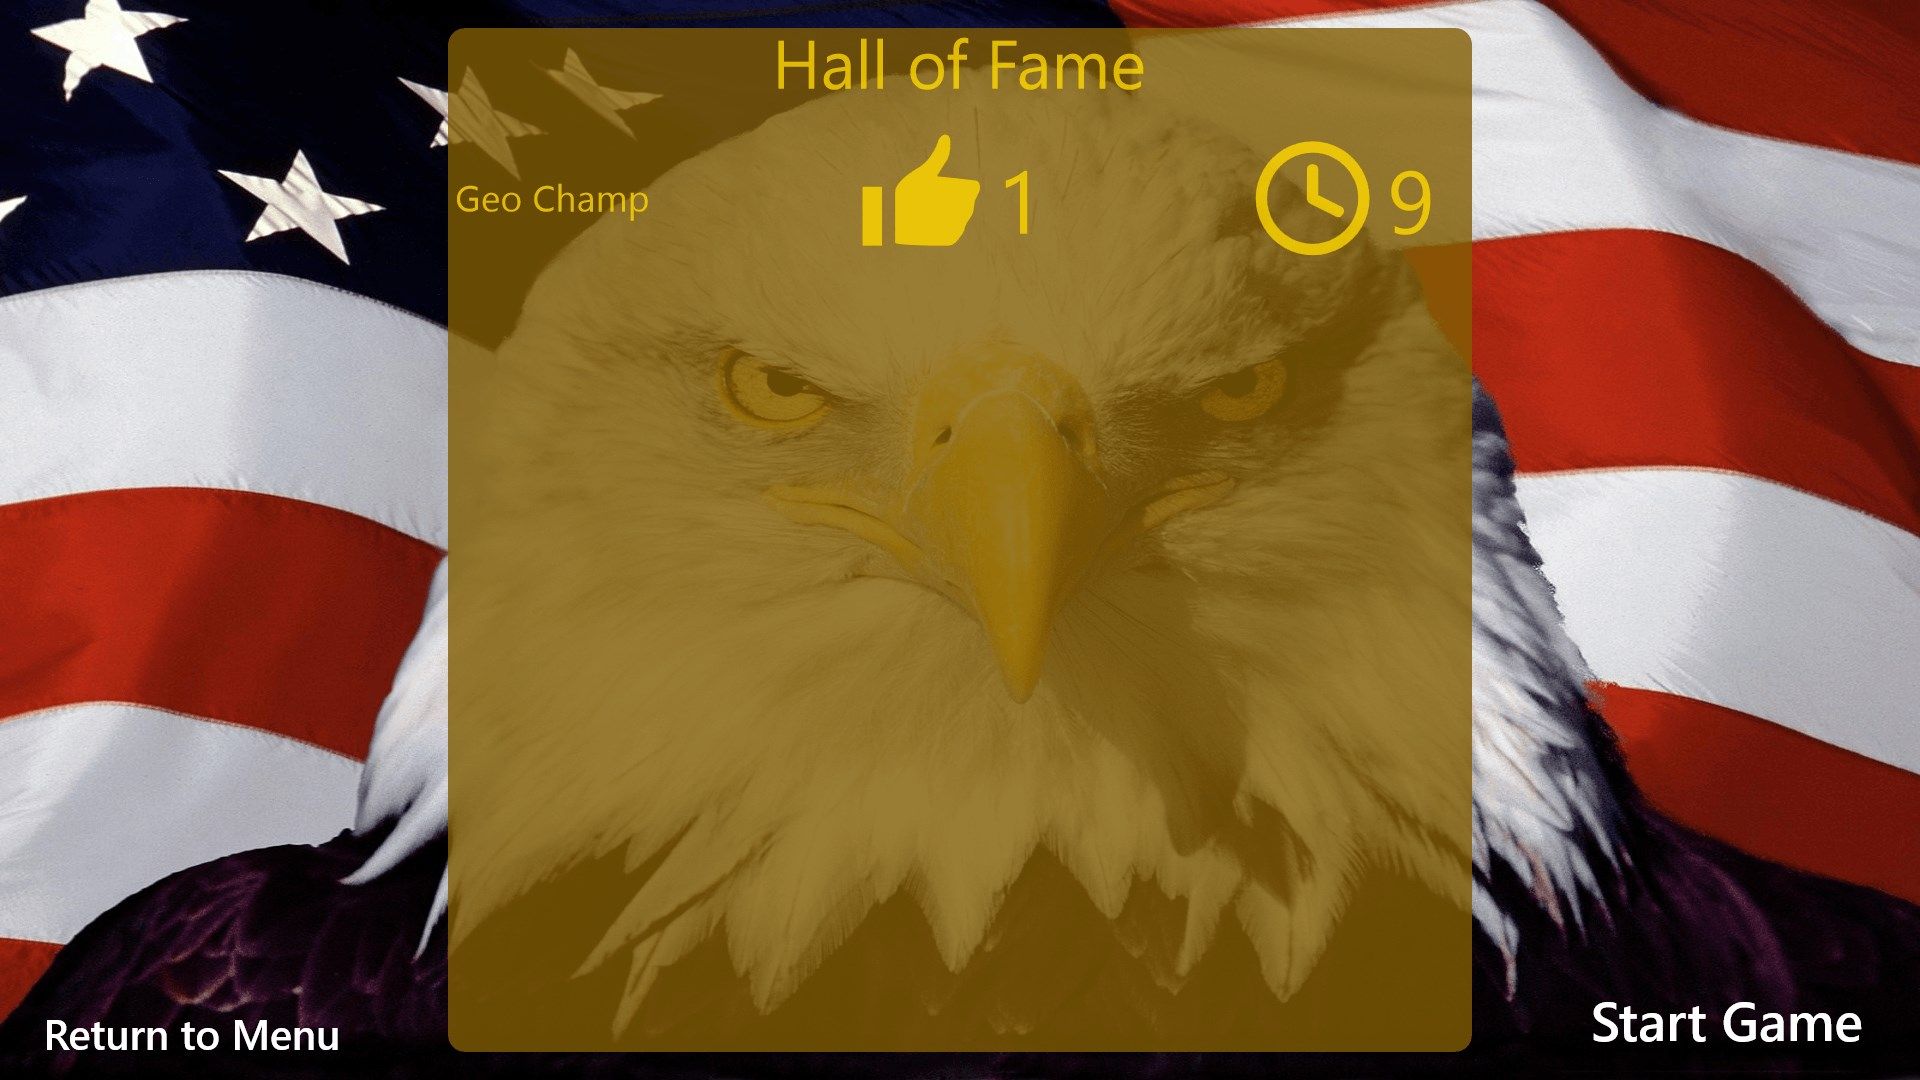 The Hall of Fame, compete to see who is the fastest, or show off your best scores.